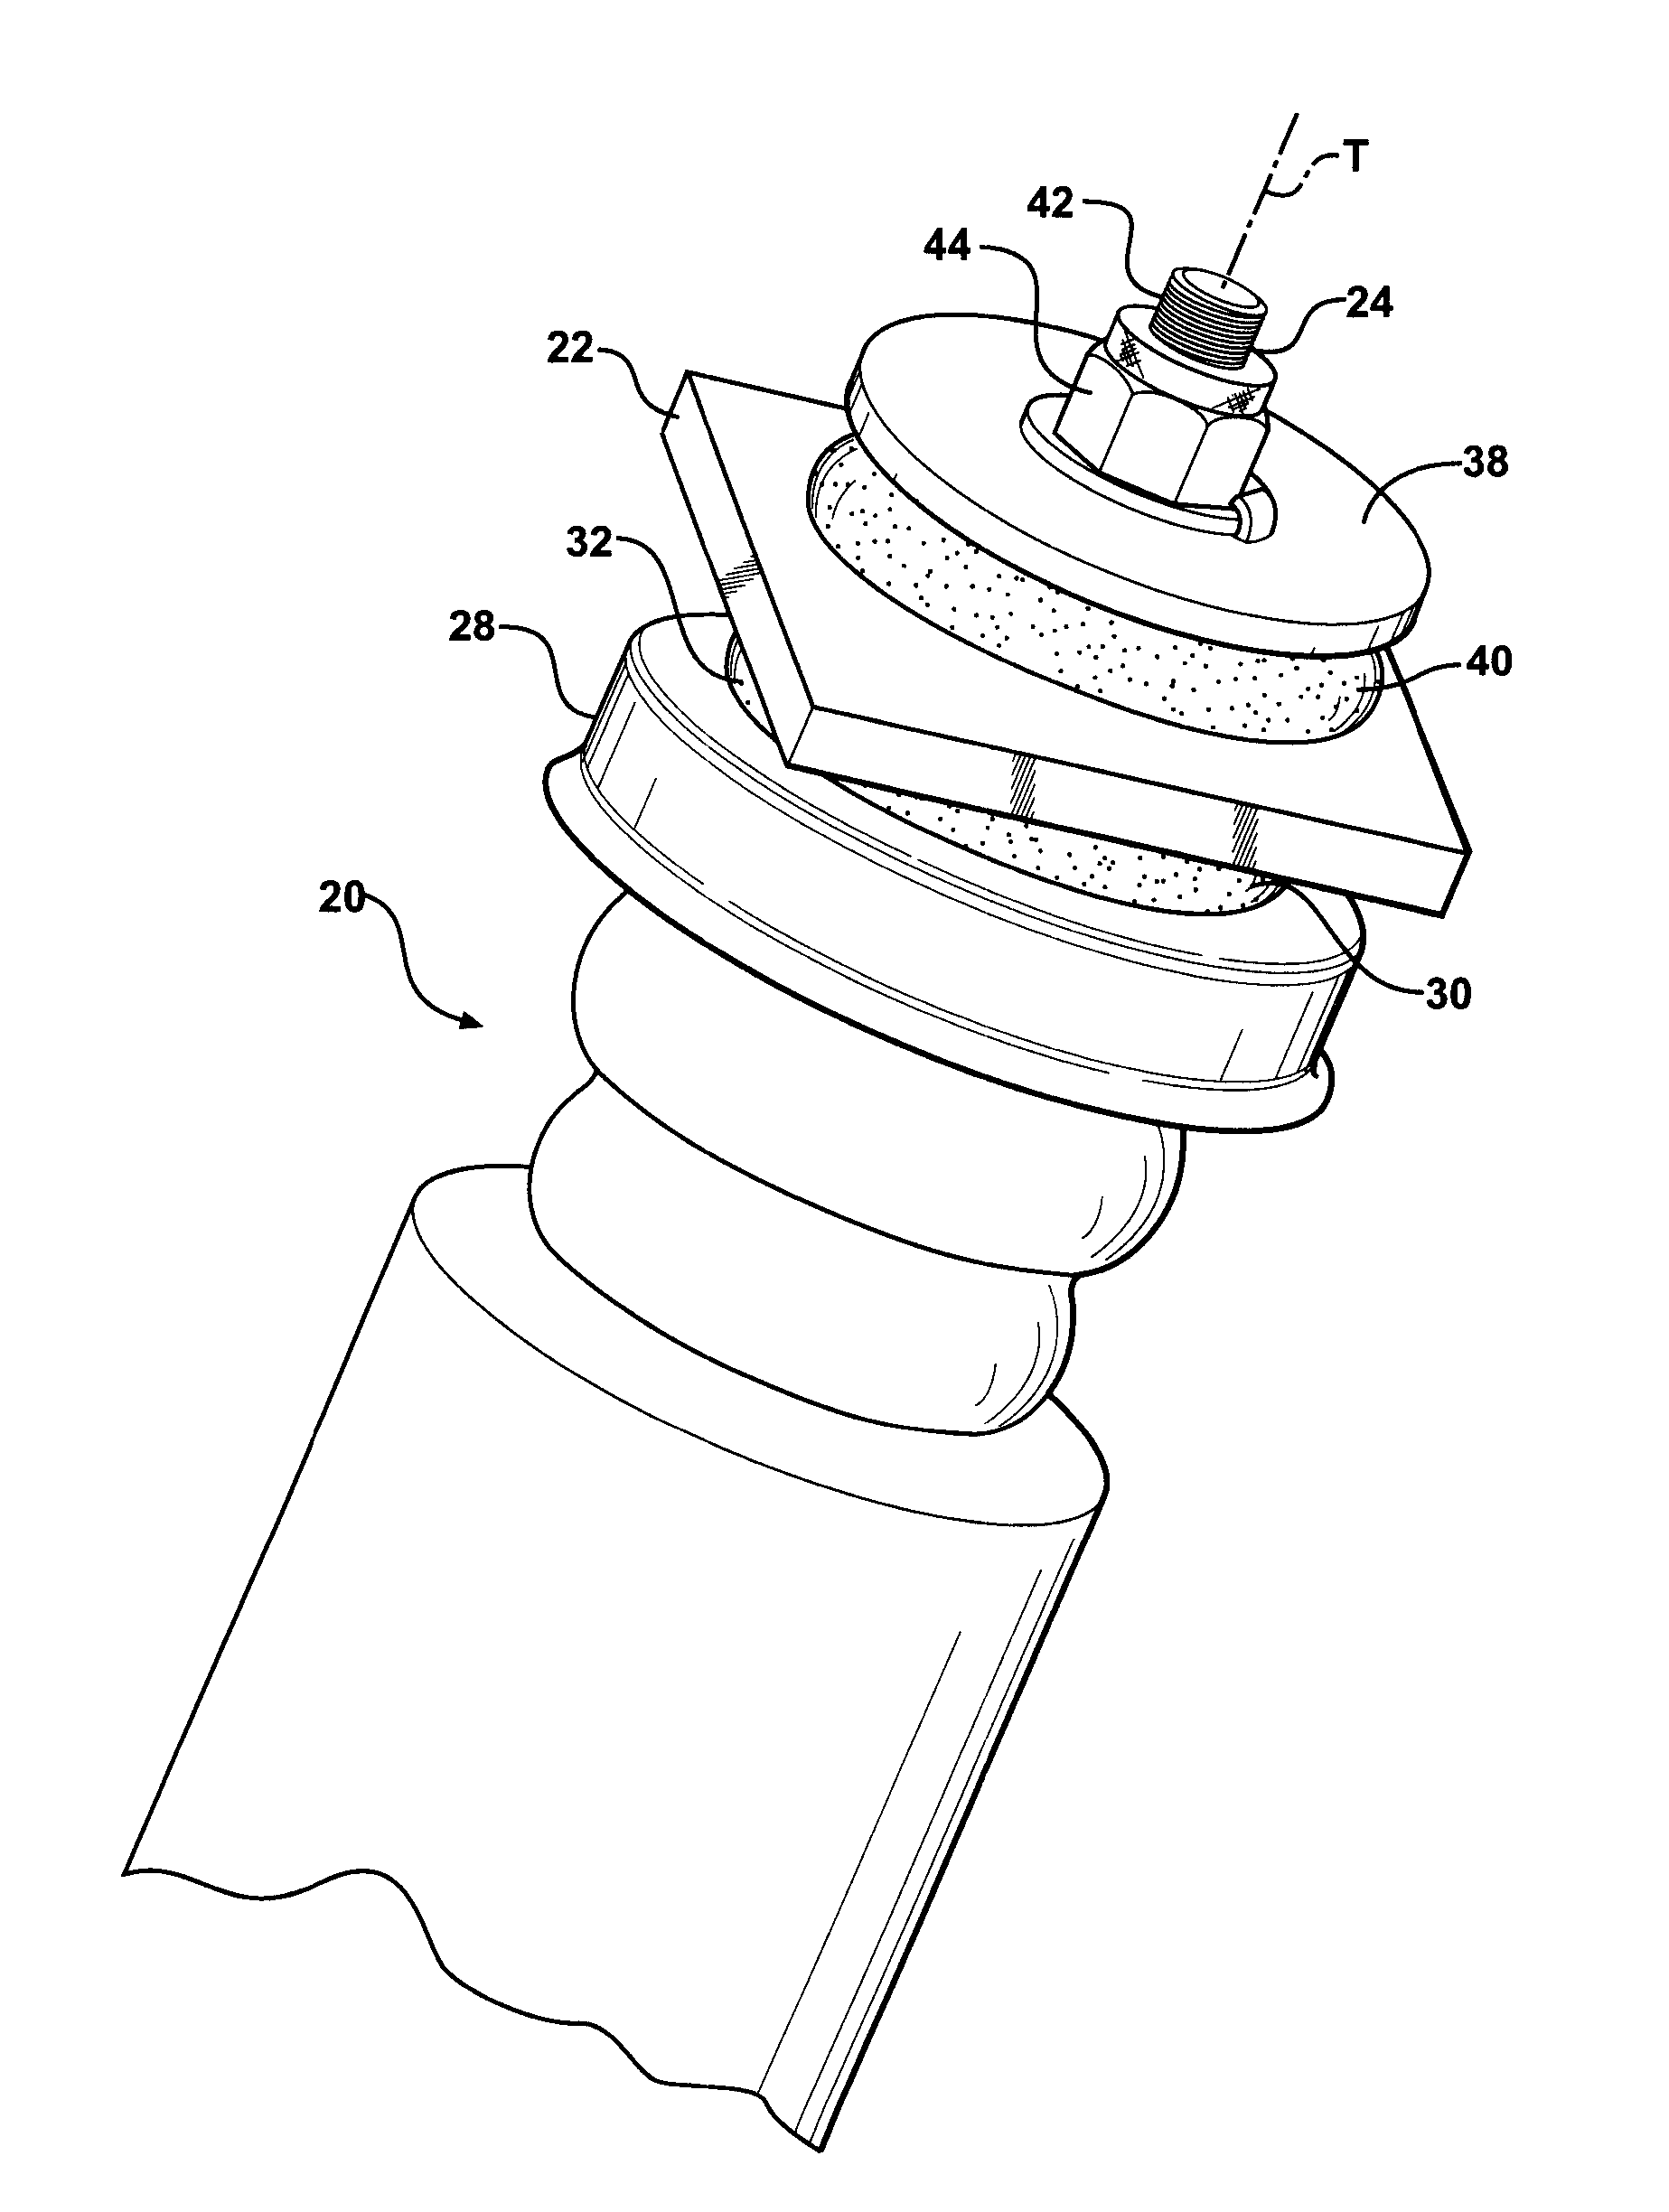 Insulator for a wheel suspension system